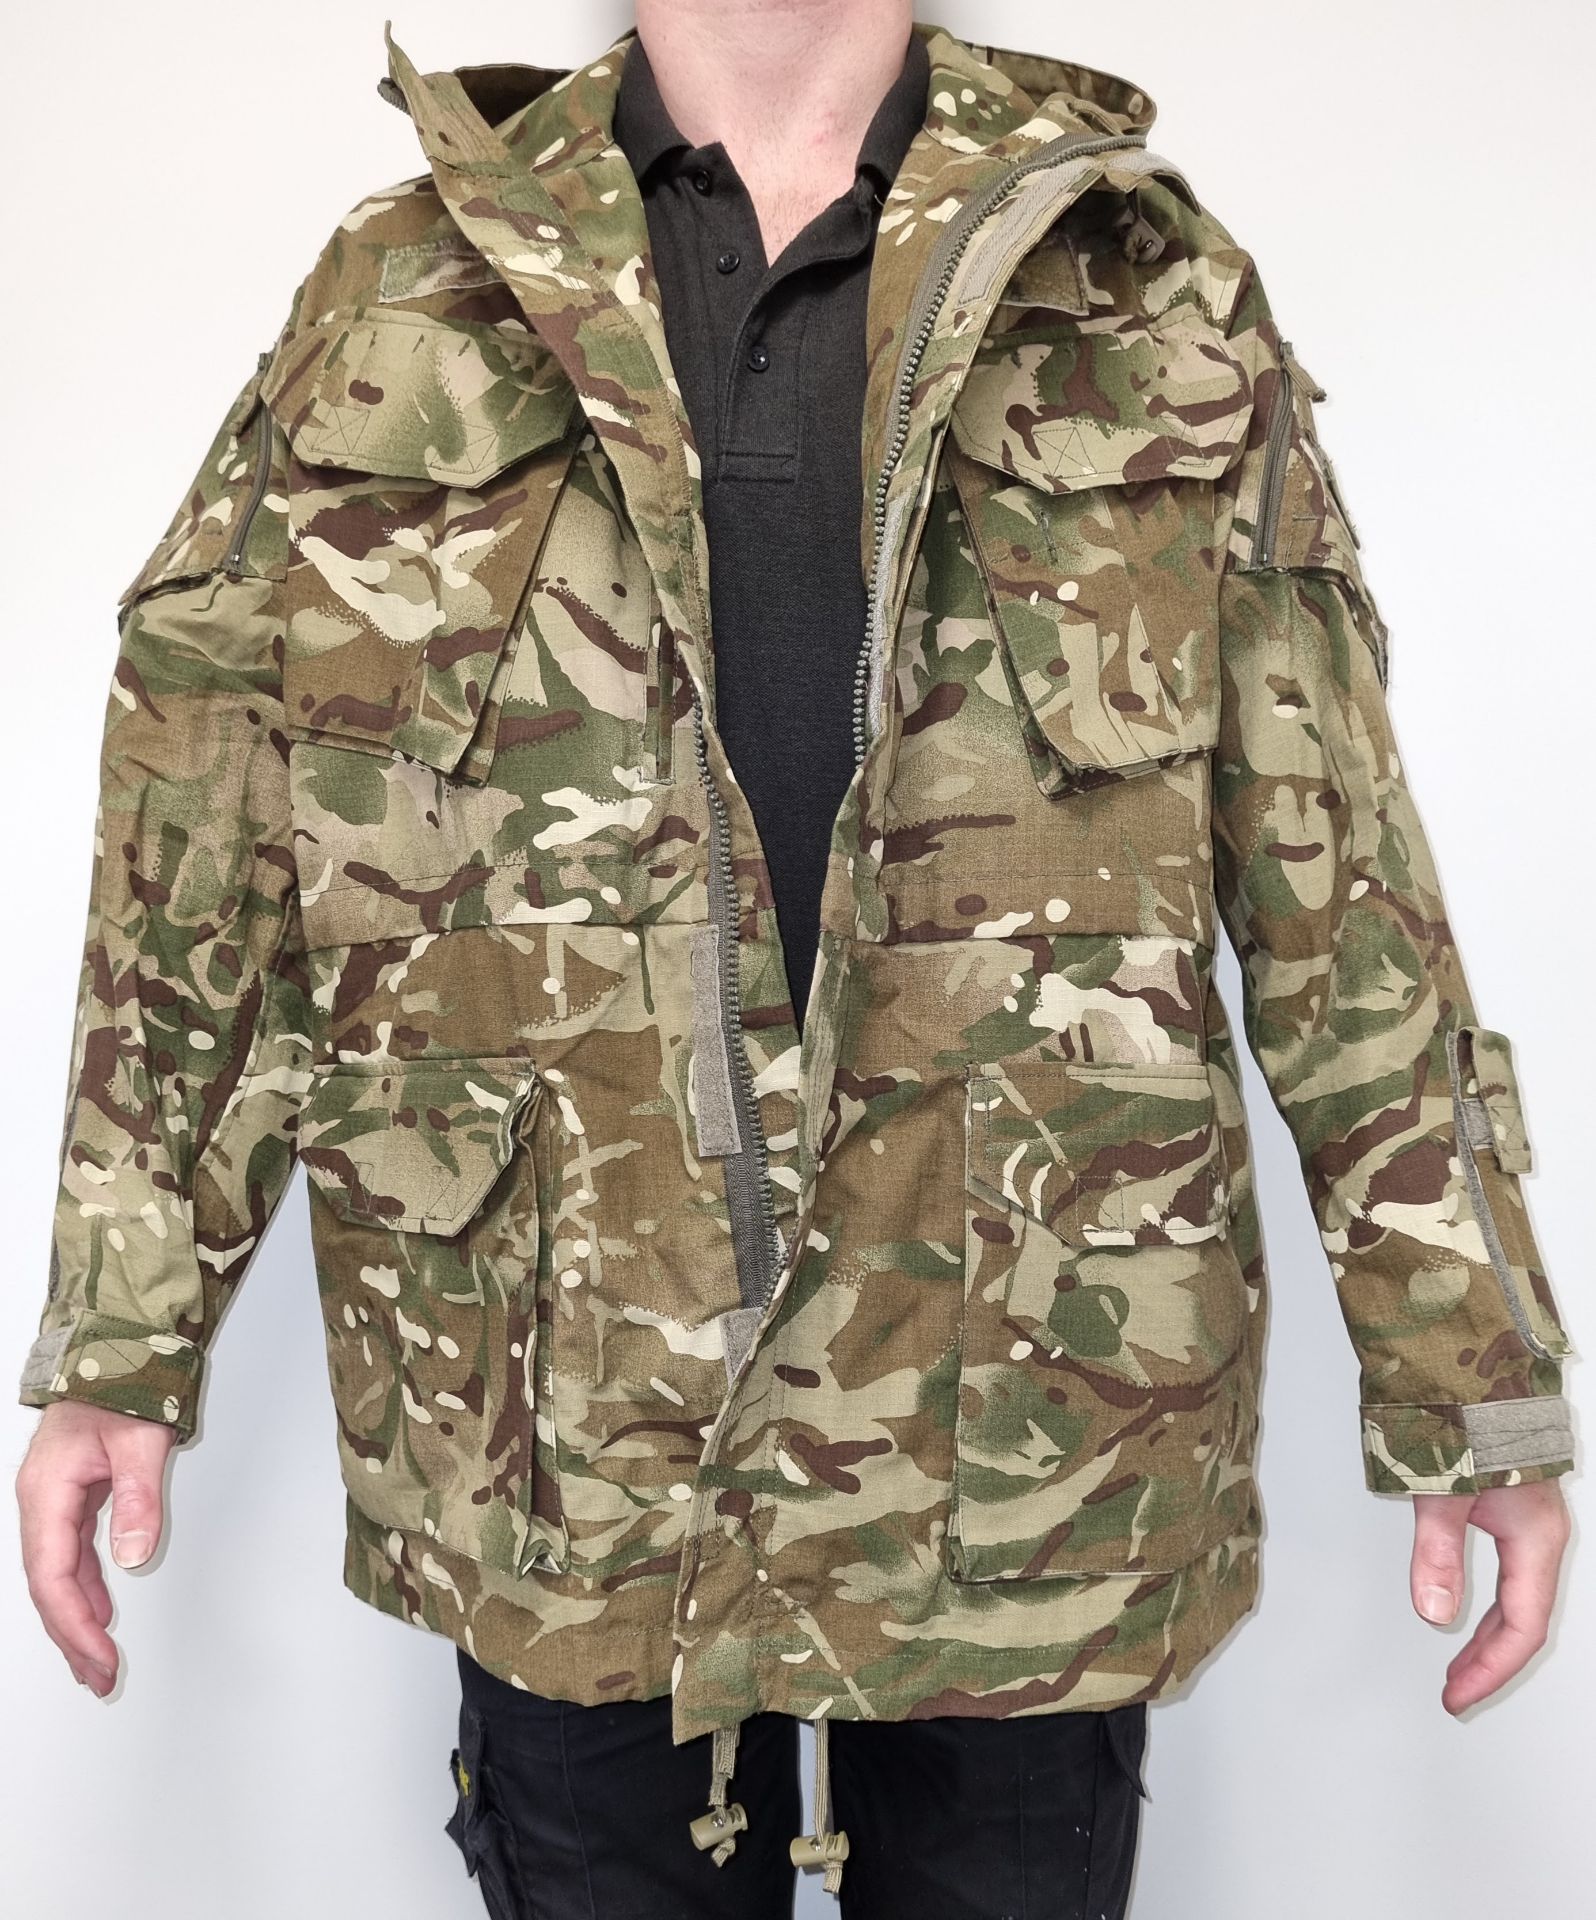 20x British Army MTP windproof smocks - mixed grades and sizes